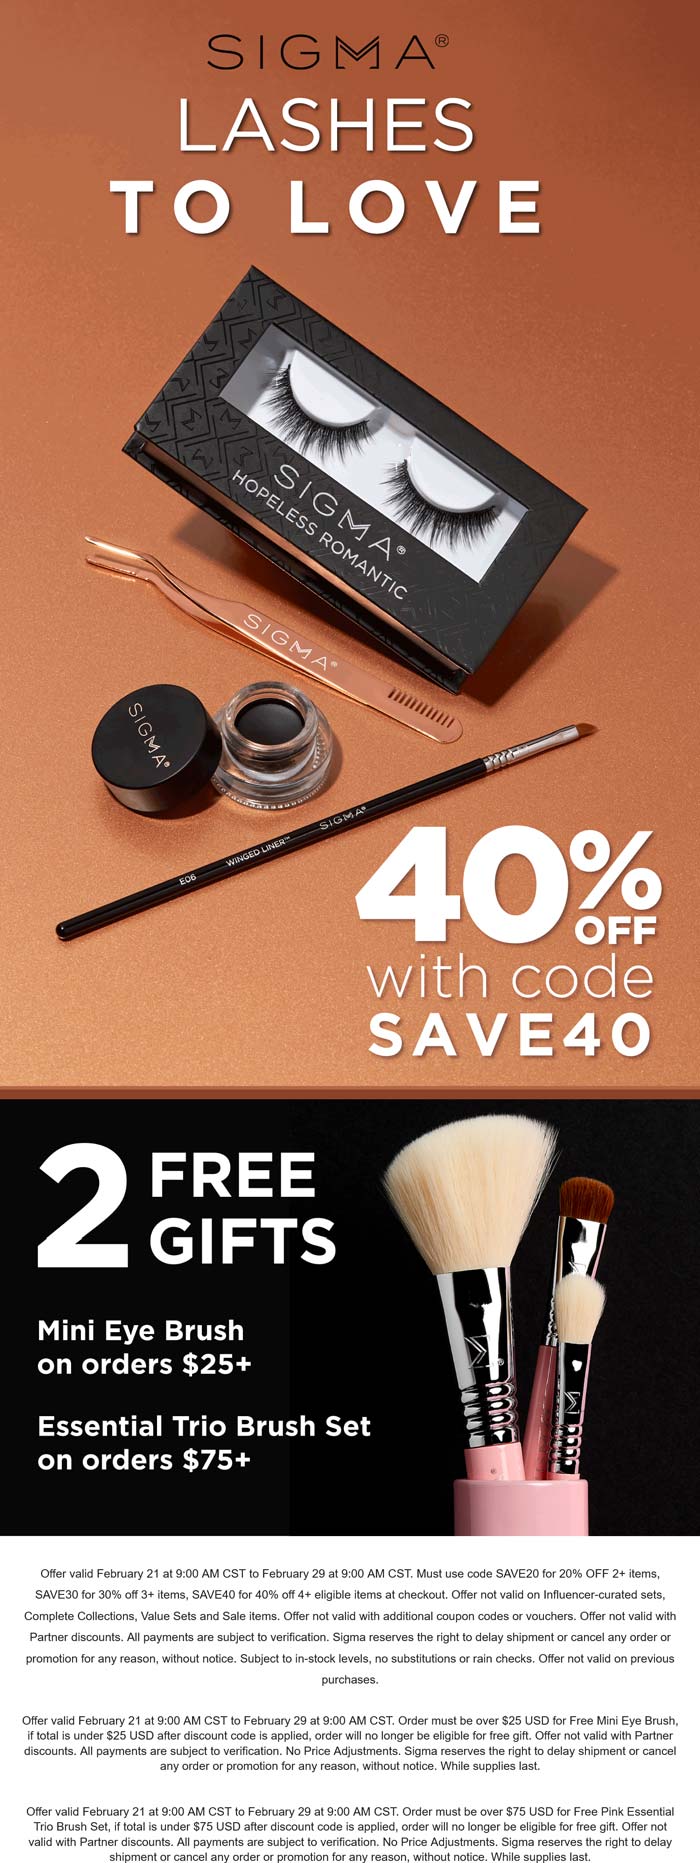 Sigma stores Coupon  20-40% off 2+ items also free gifts over $25 at Sigma beauty via promo codes SAVE20 SAVE30 & SAVE40 #sigma 